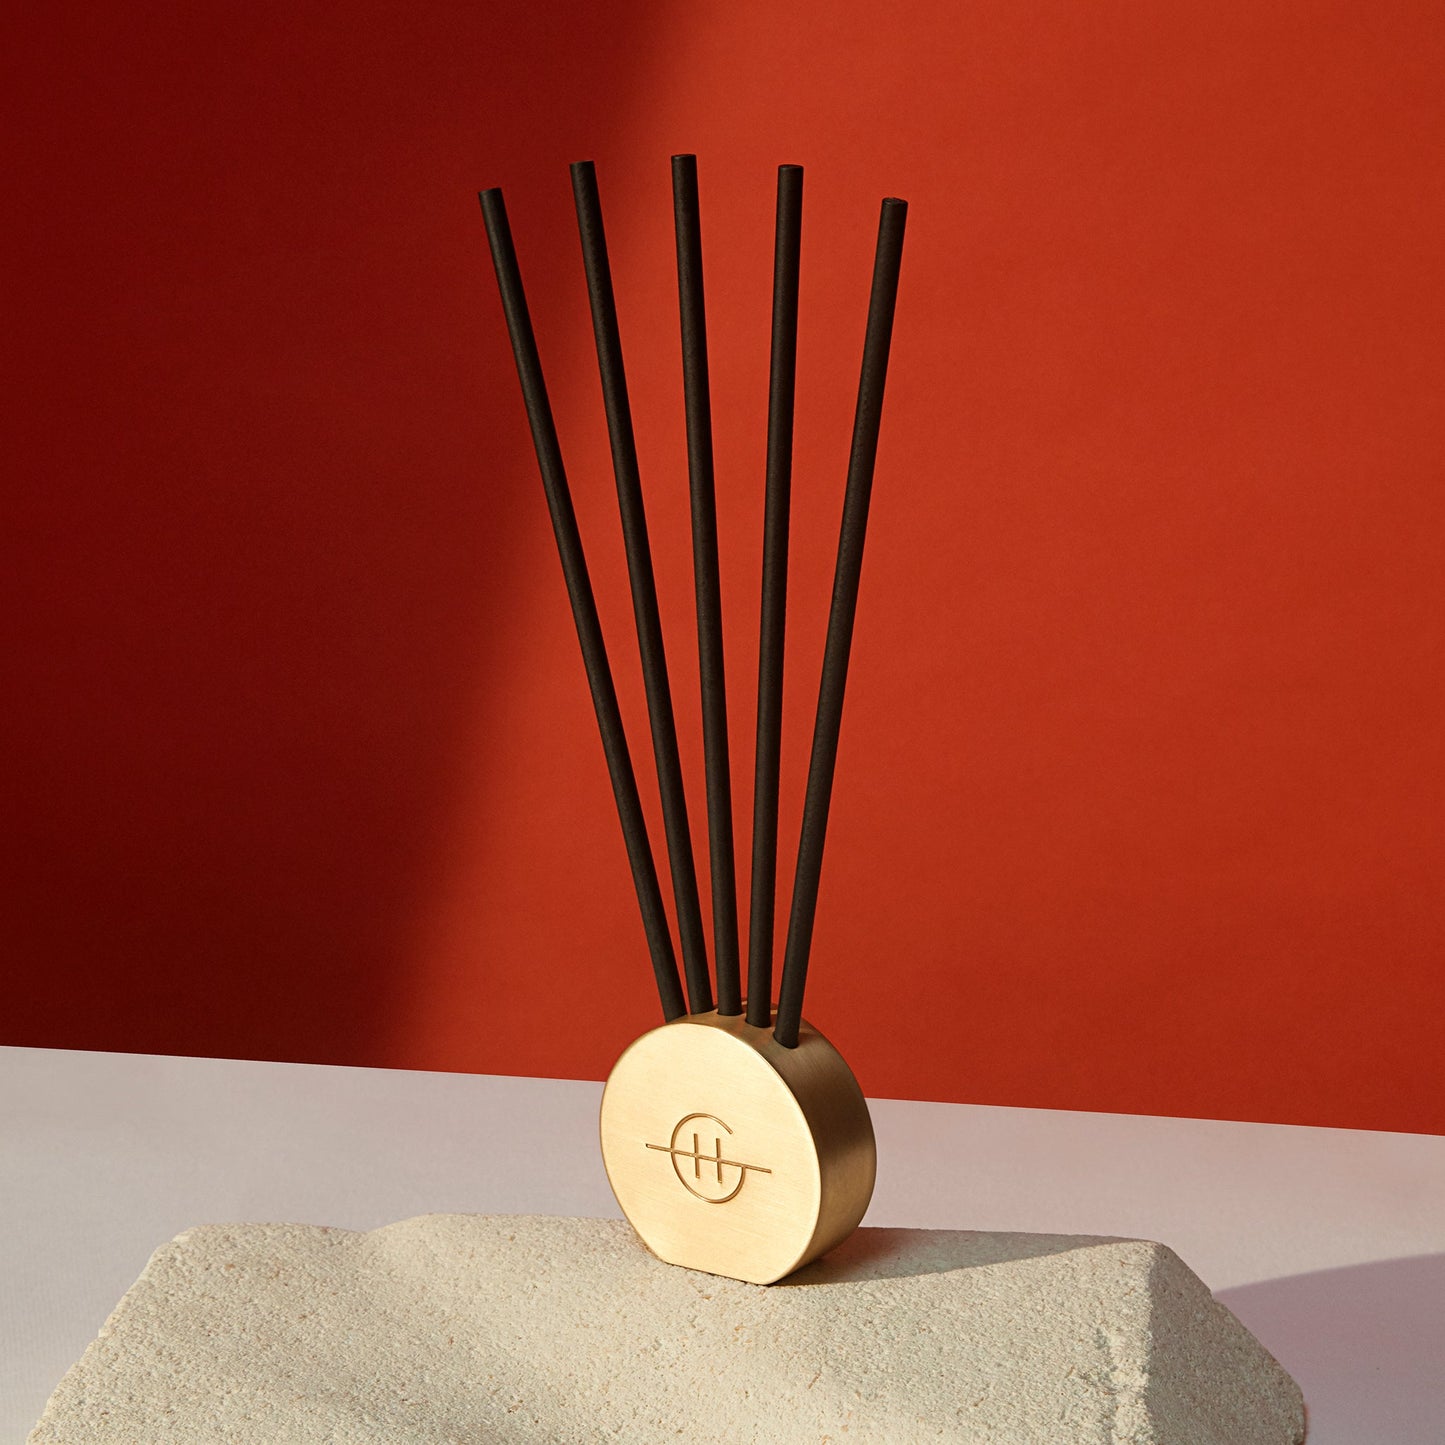 five Scent Stems displayed in the gold metal vessel on a table against a red wall